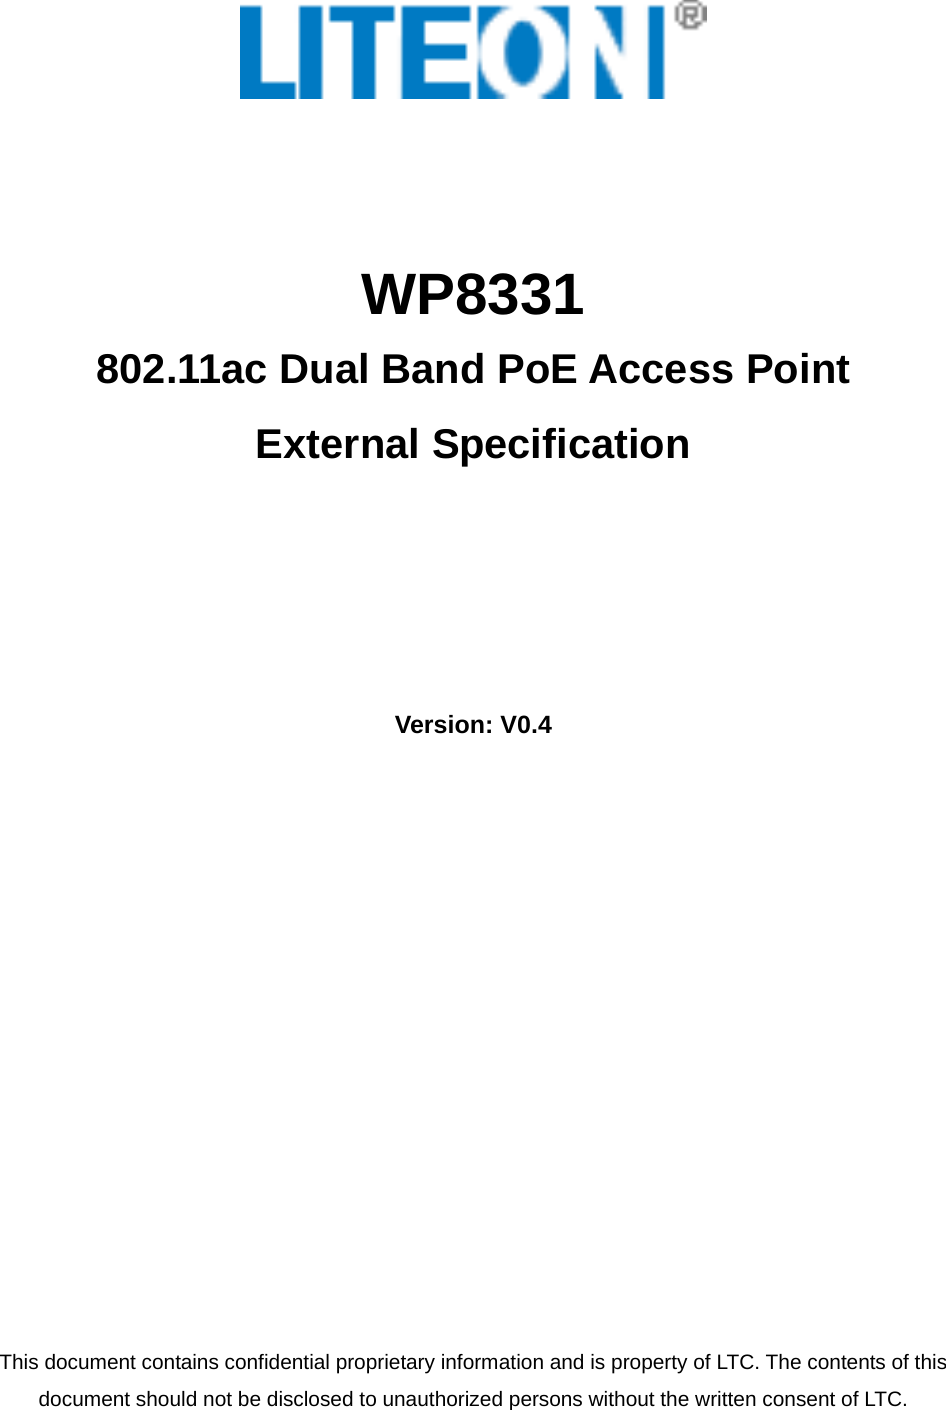    WP8331 802.11ac Dual Band PoE Access Point External Specification       Version: V0.4                 This document contains confidential proprietary information and is property of LTC. The contents of this document should not be disclosed to unauthorized persons without the written consent of LTC.       